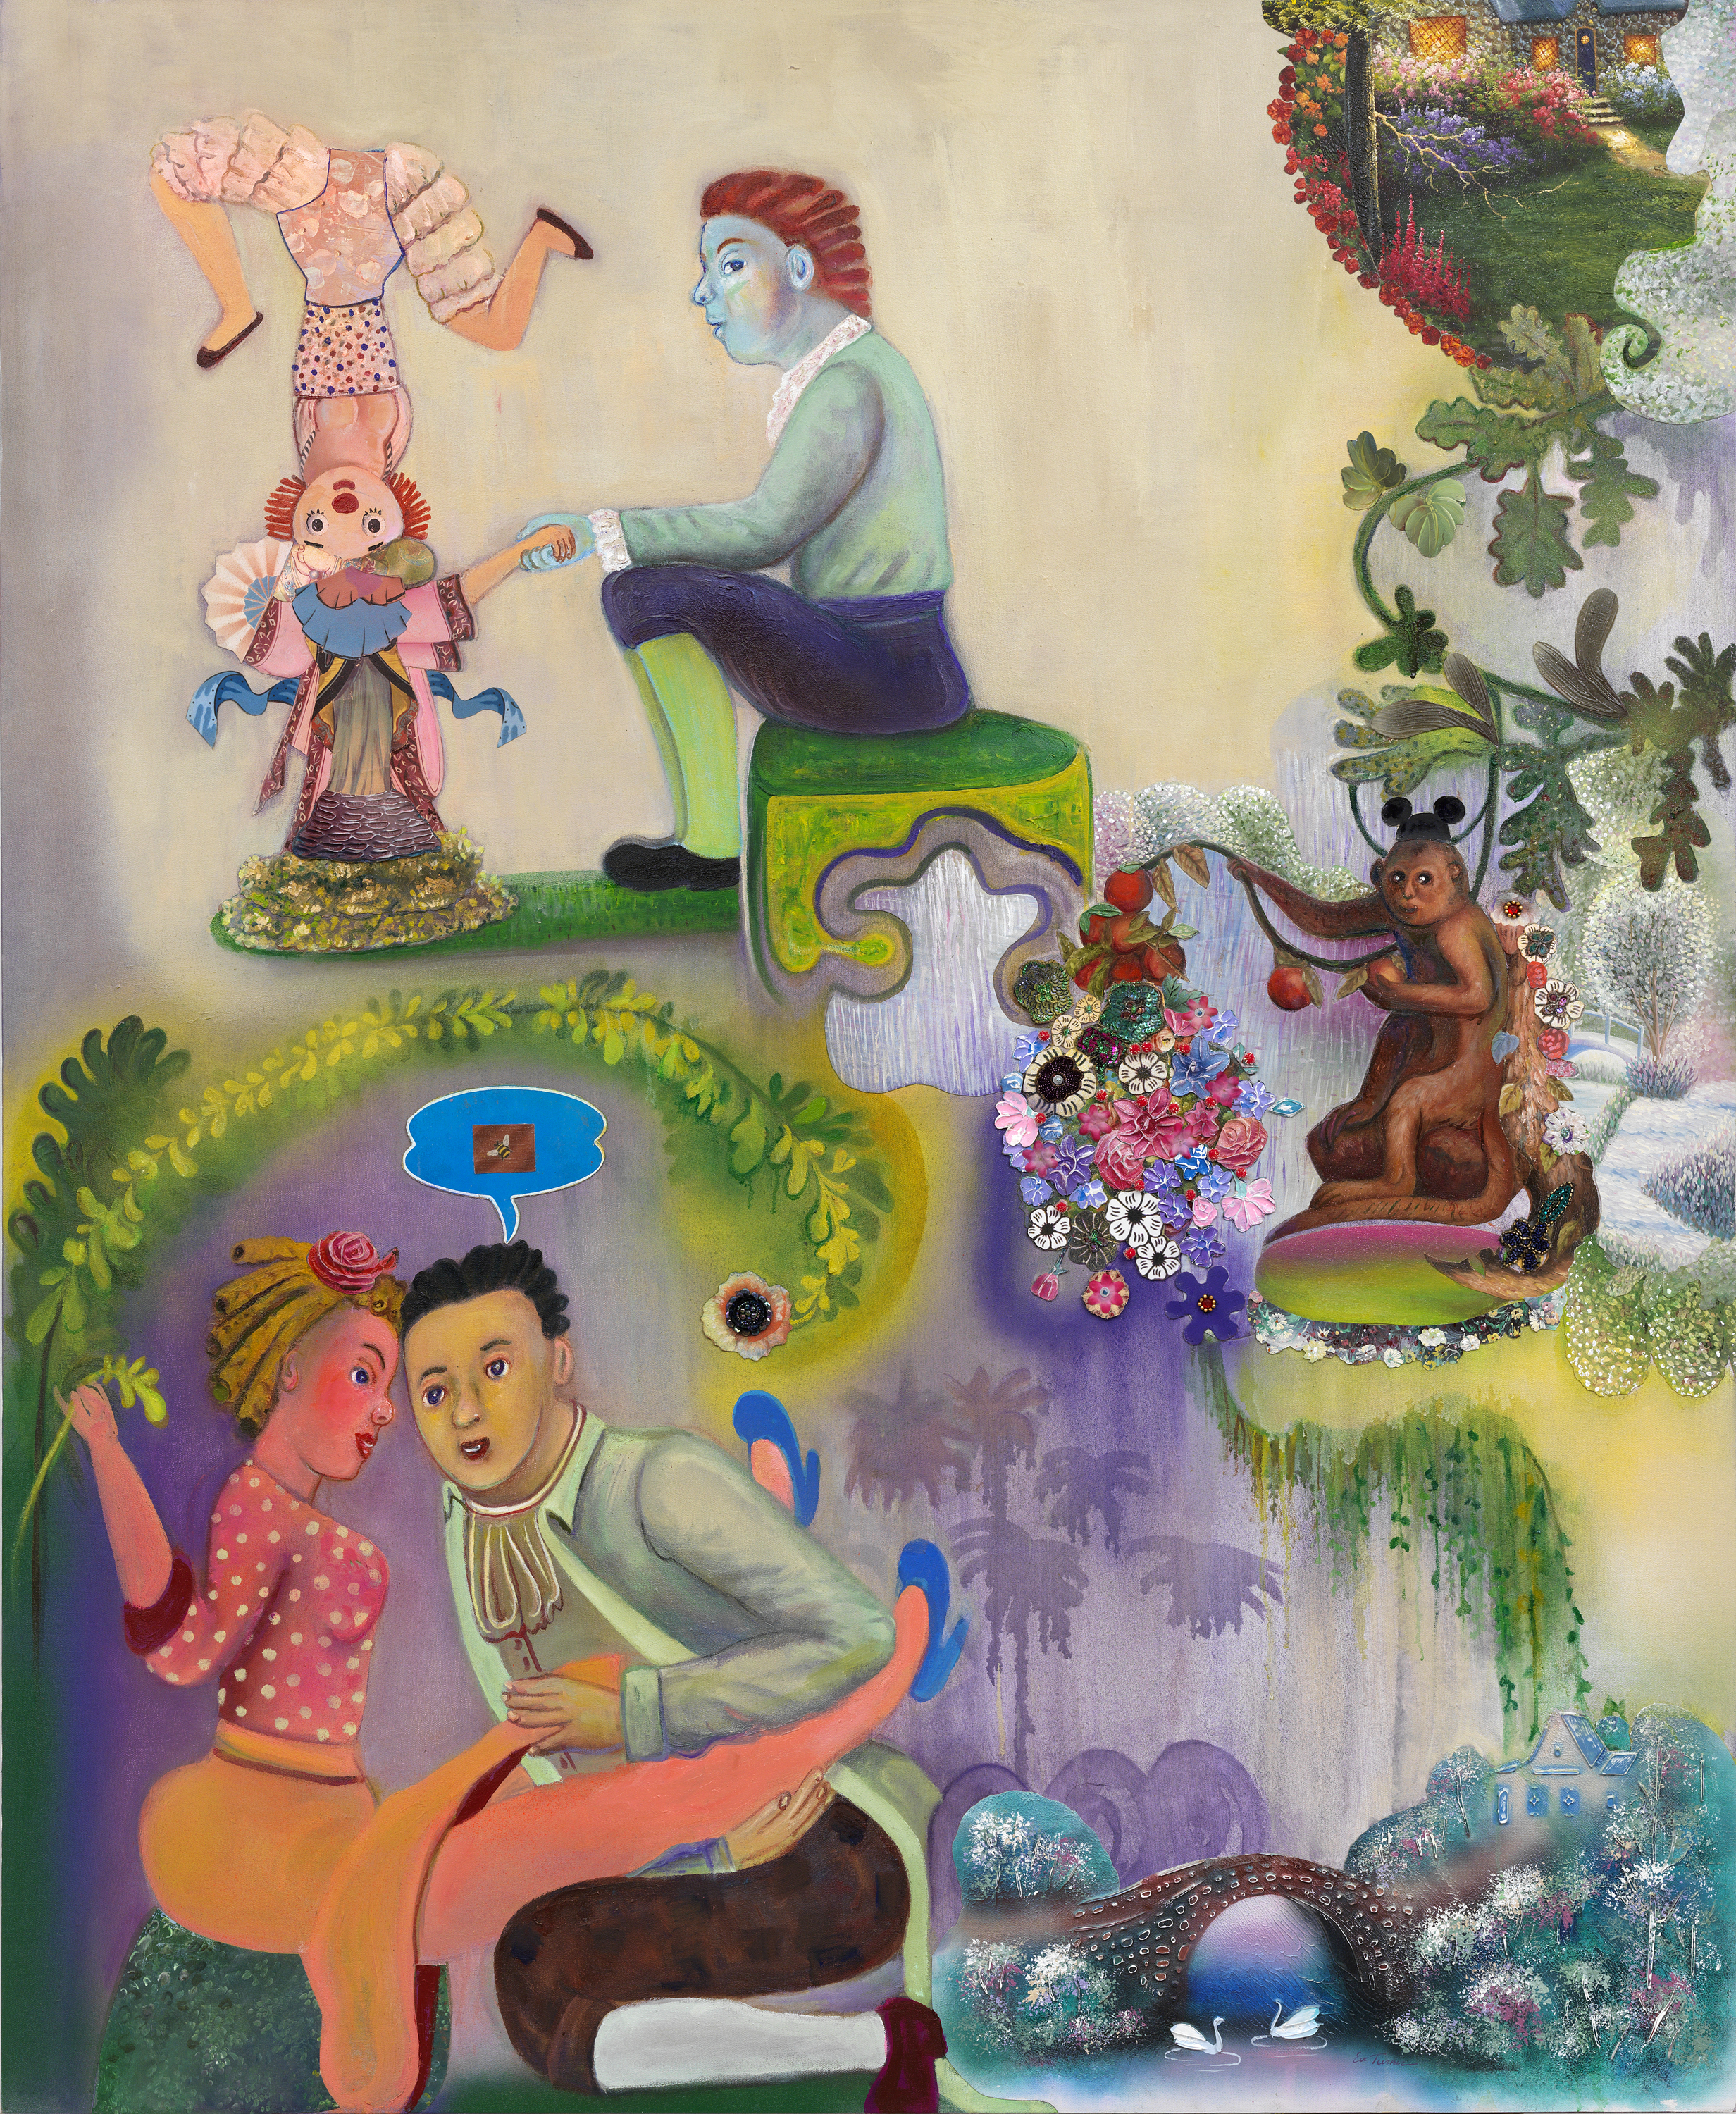 Paramours and Mischief (in the afternoon), 67" × 54", mixed media and collage on canvas, 2011 